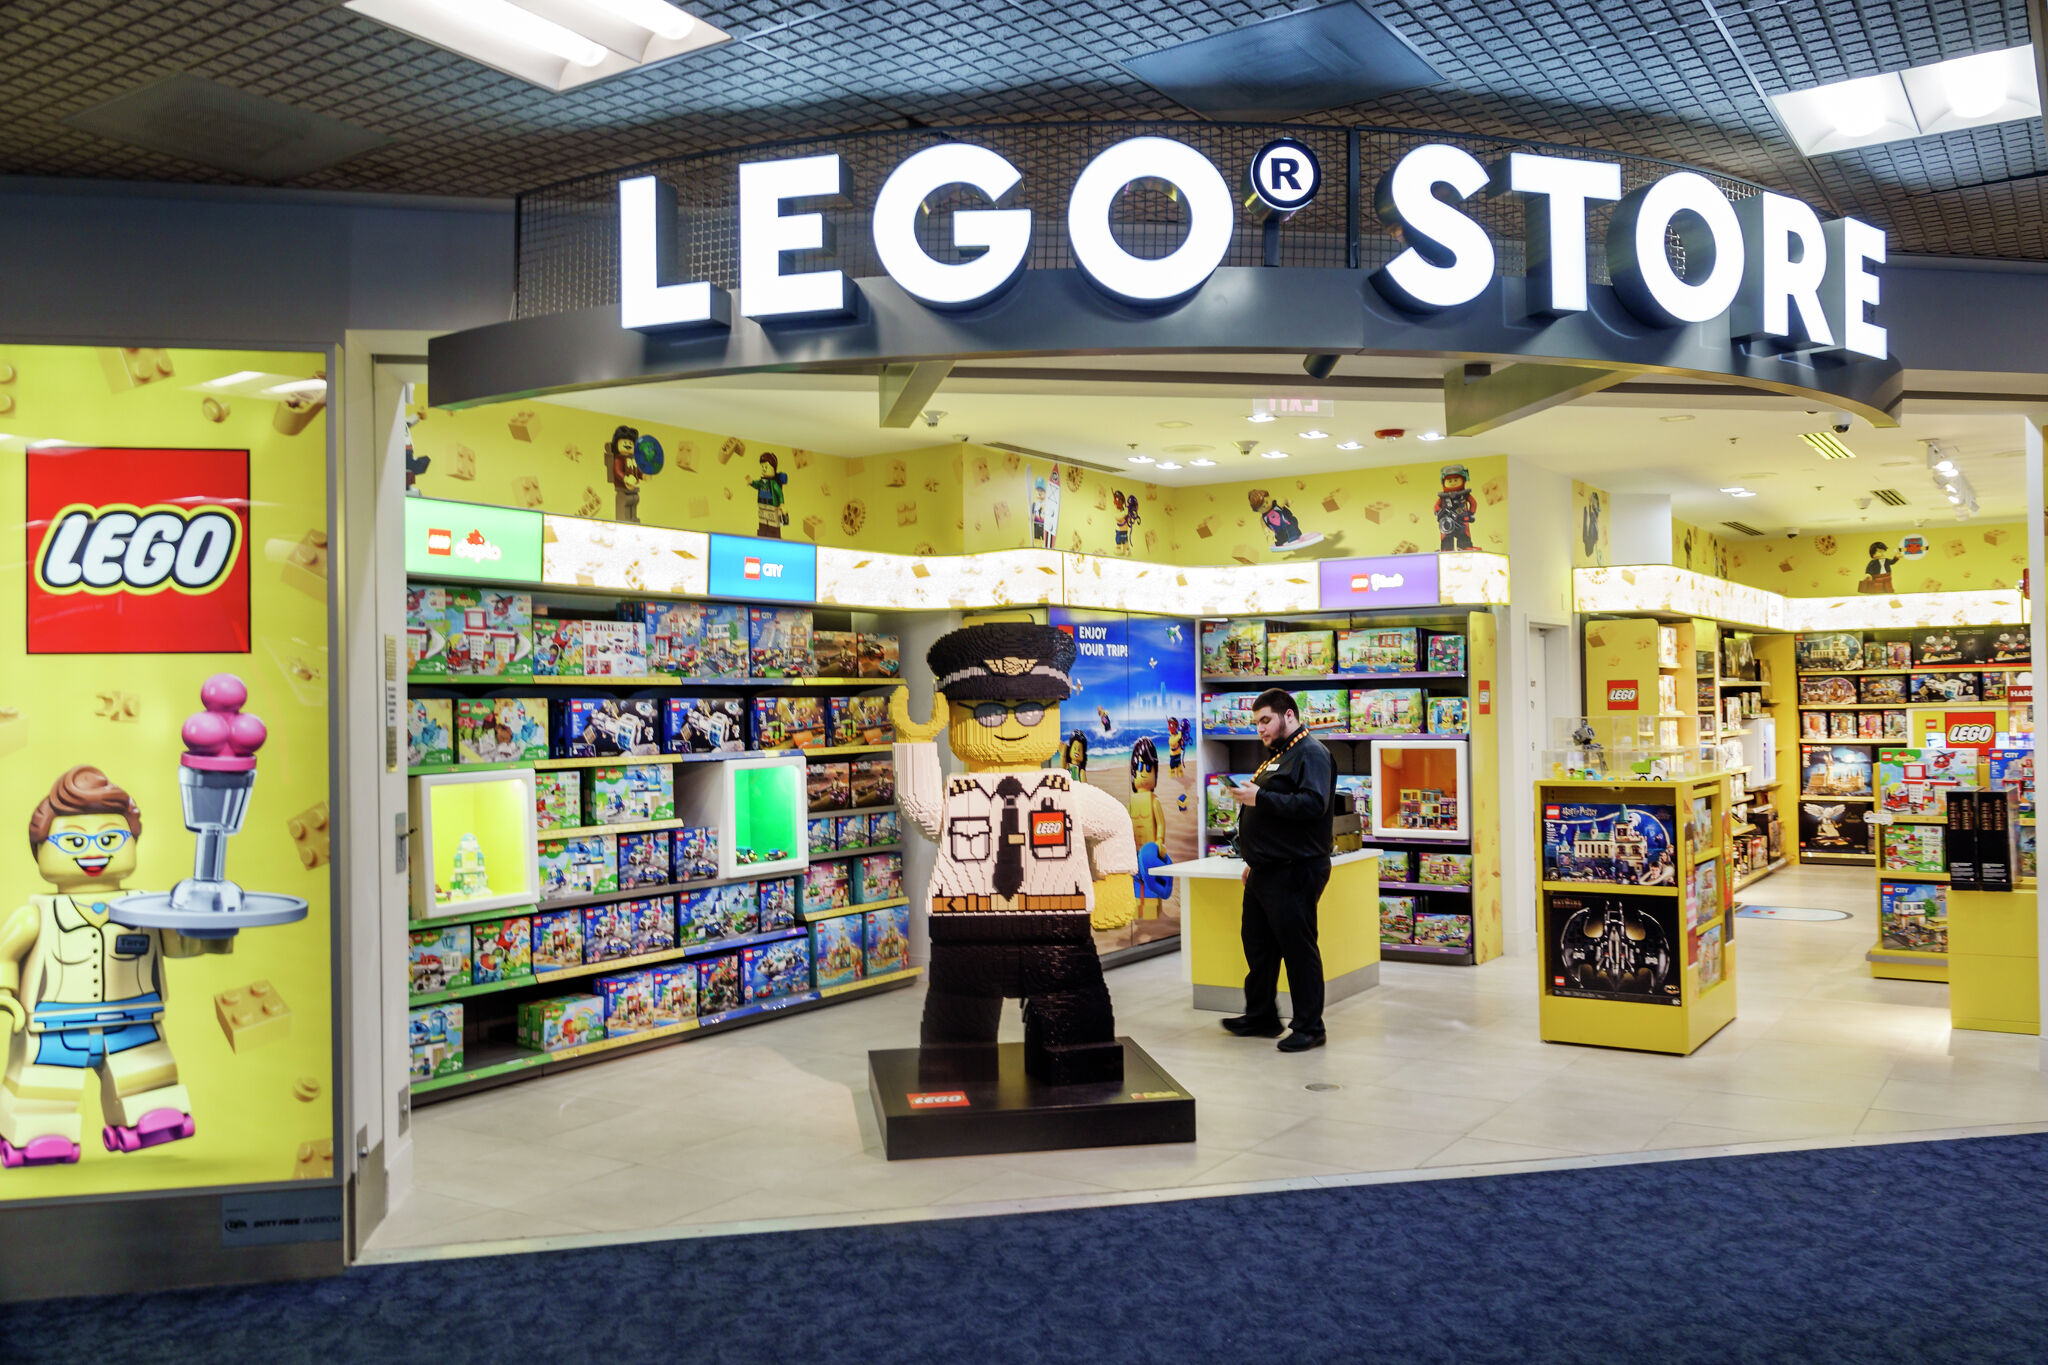 San Antonio LEGO Store is now open at Shops at La Cantera